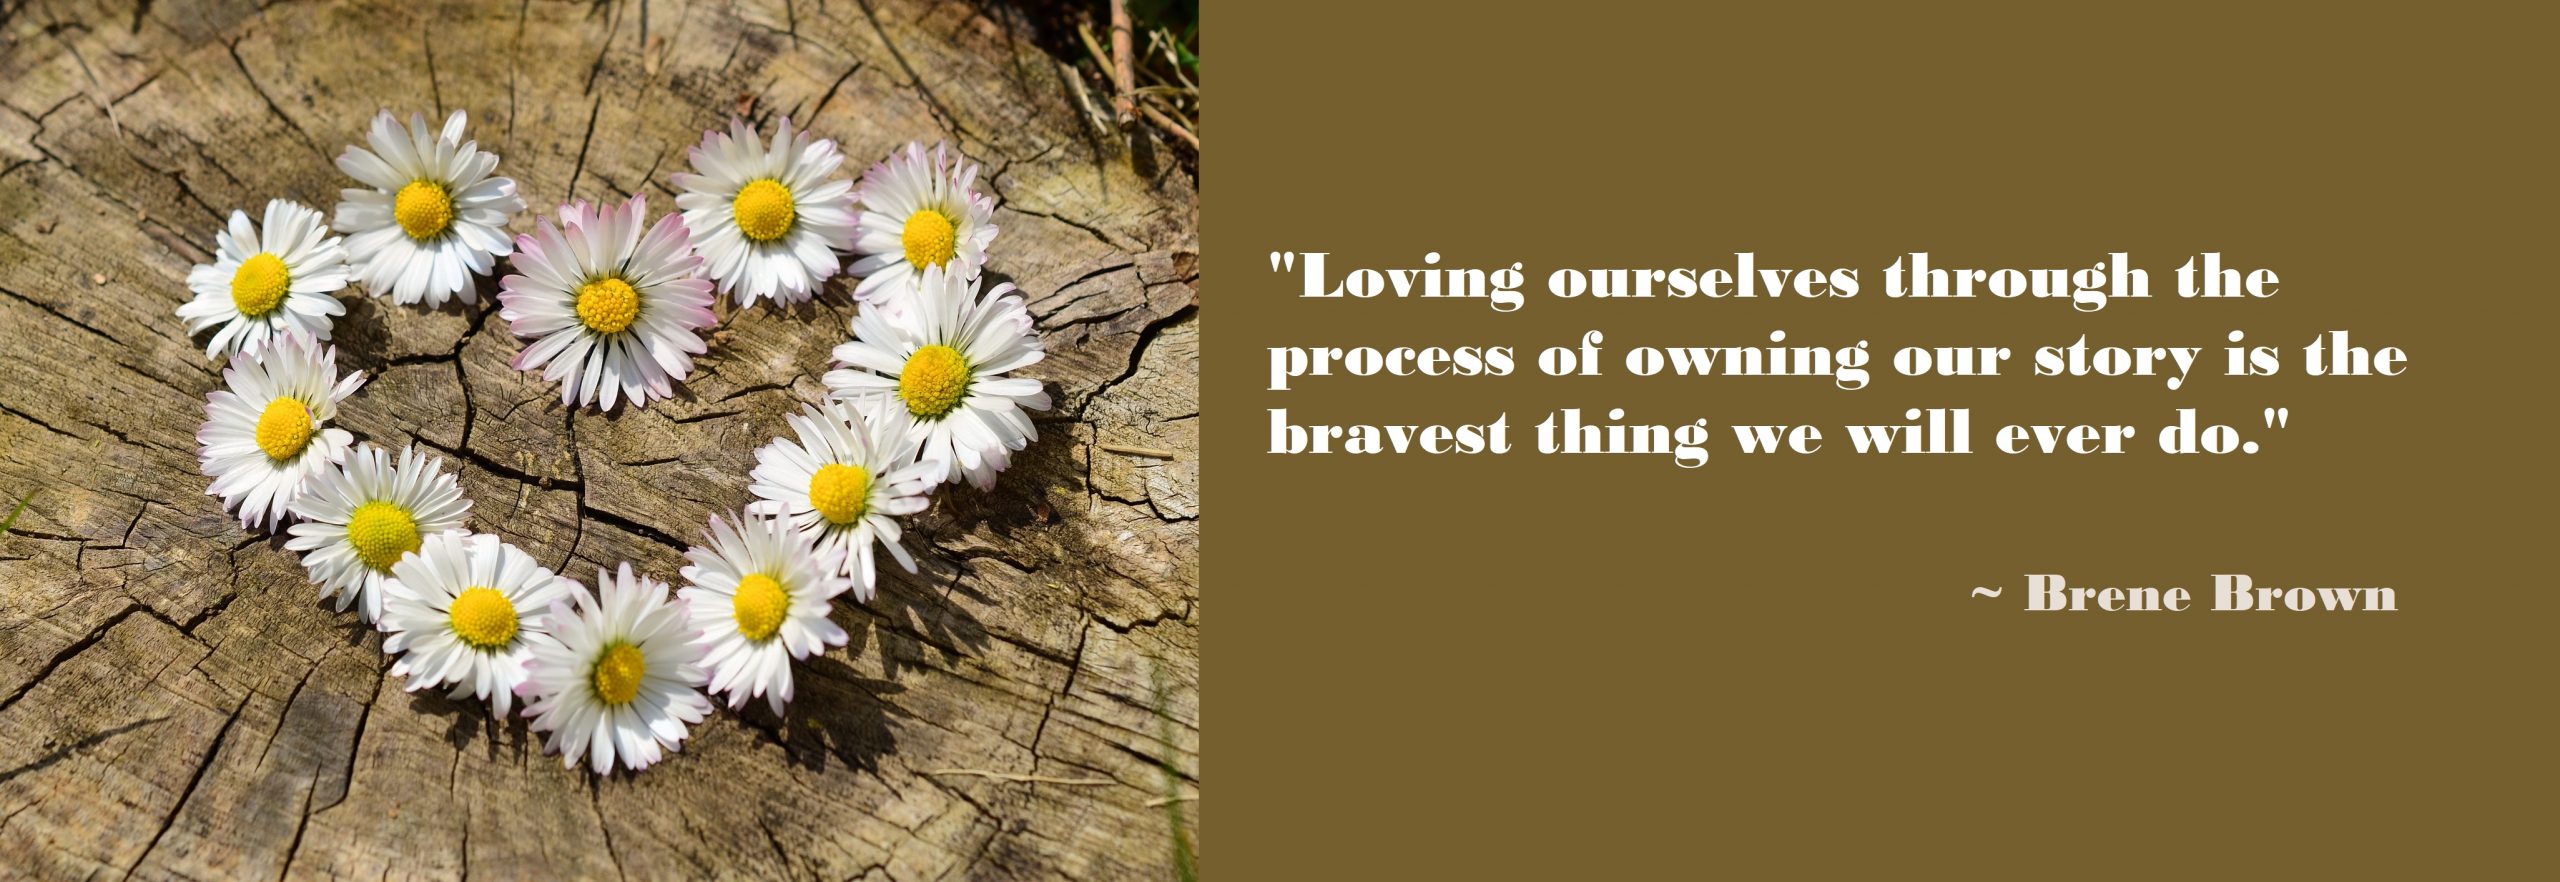 Loving ourselves through the process of owning our story is the bravest thing we will ever do. Brene Brown